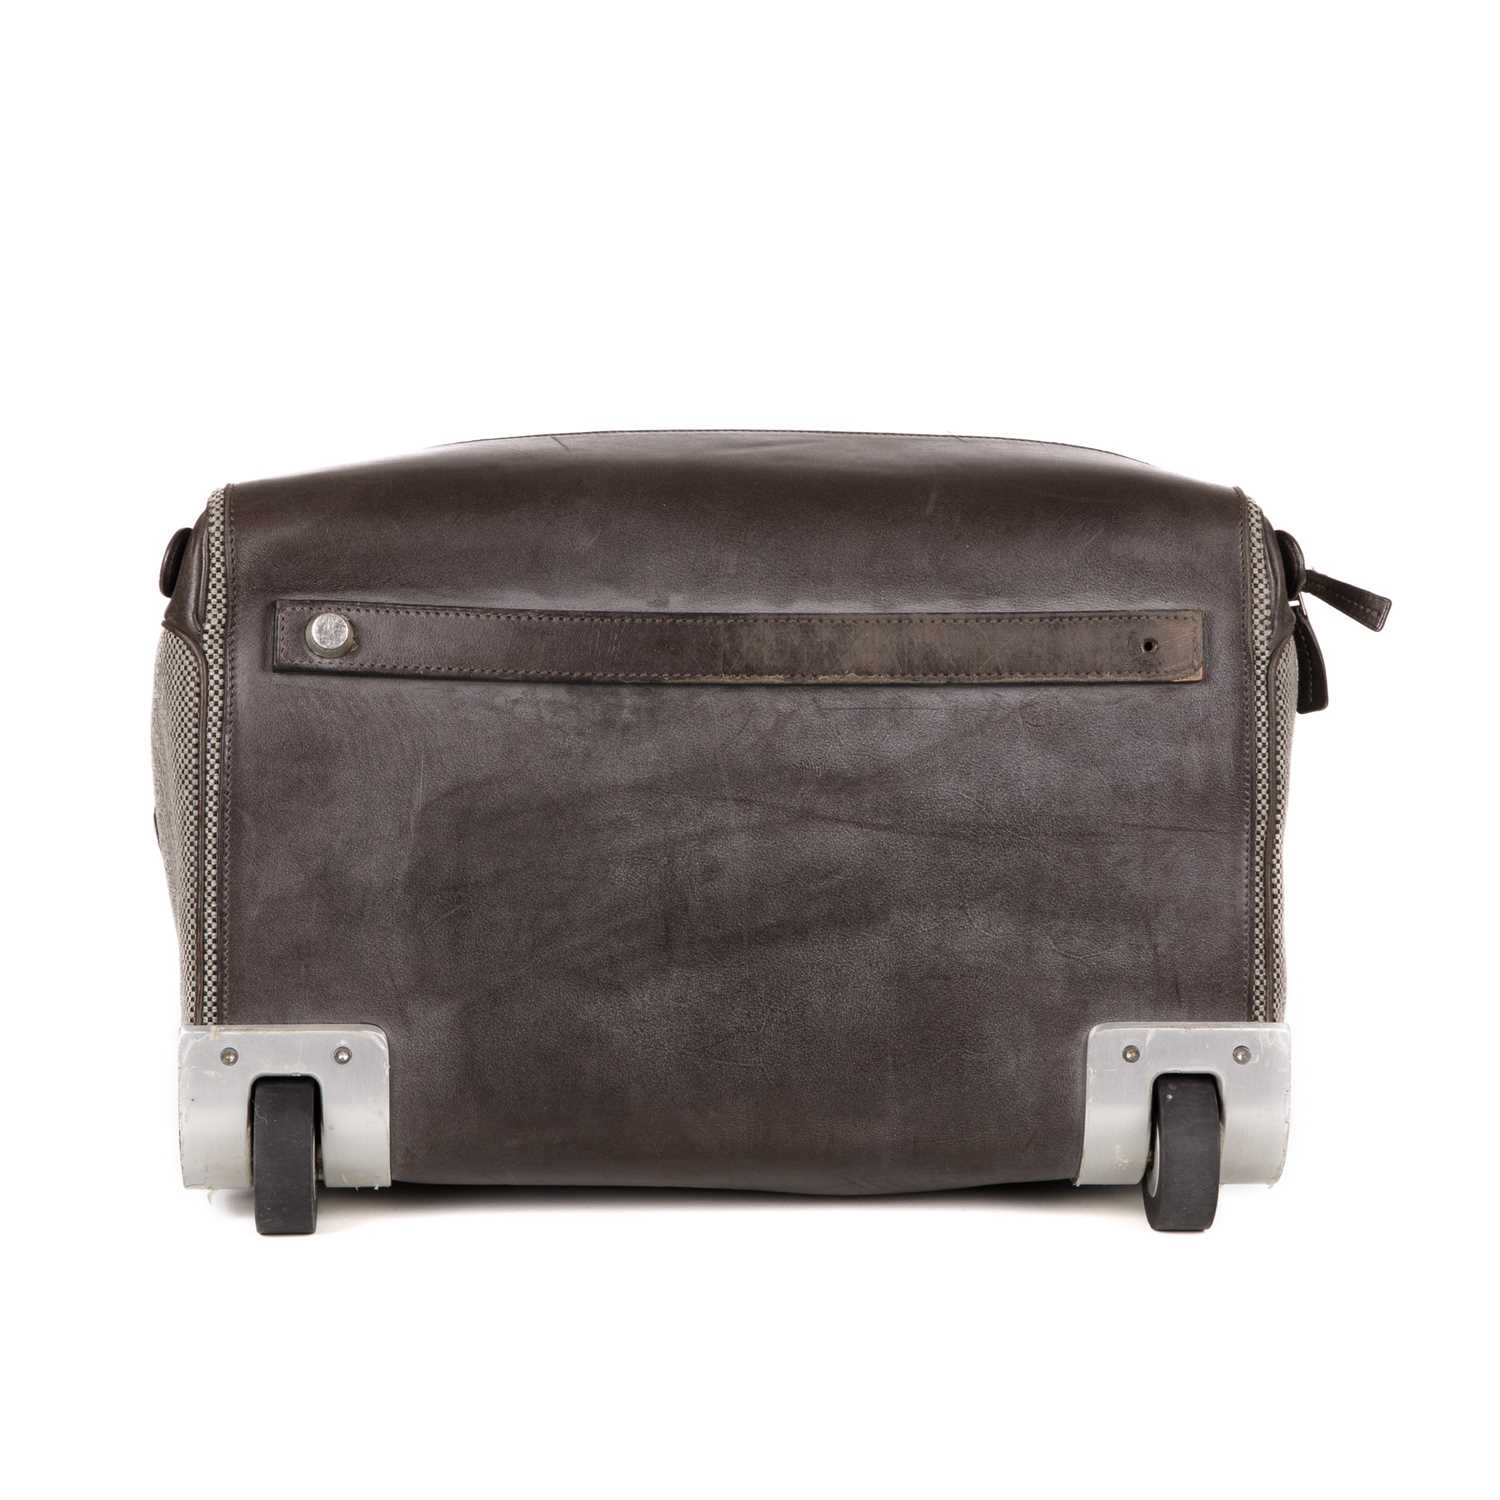 Hermes, a 2012 Cleche-Express cabin suitcase, designed with grey water-repellent H tech canvas - Image 4 of 6